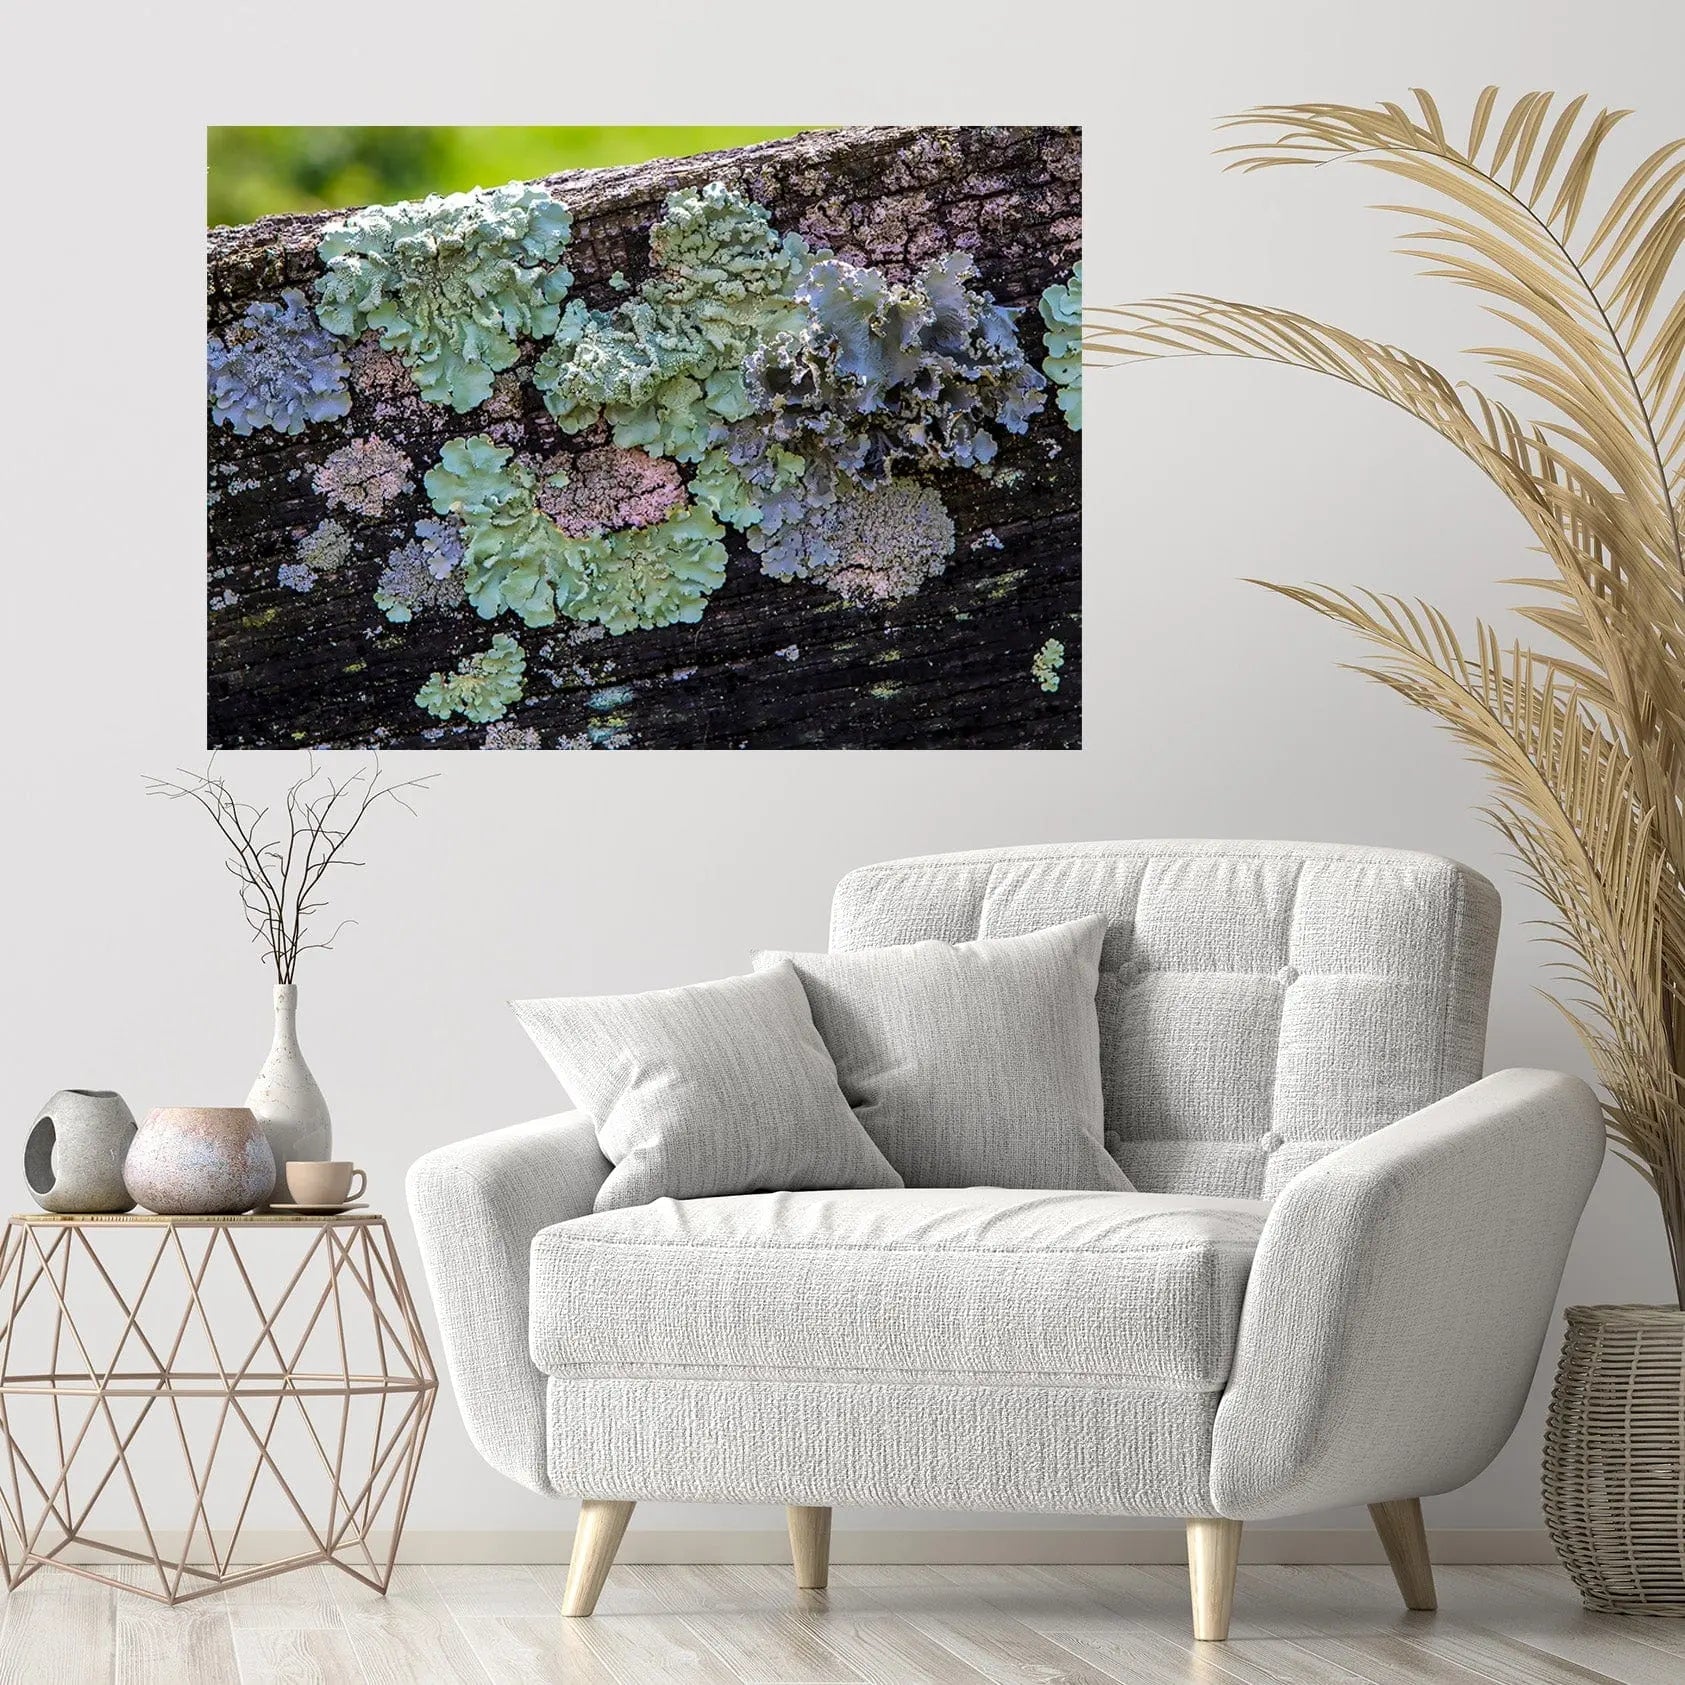 Lichen wall decor pastel colors wooden fence rectangle fine art on white wall by Lisa Blount 30x20 custom sizes